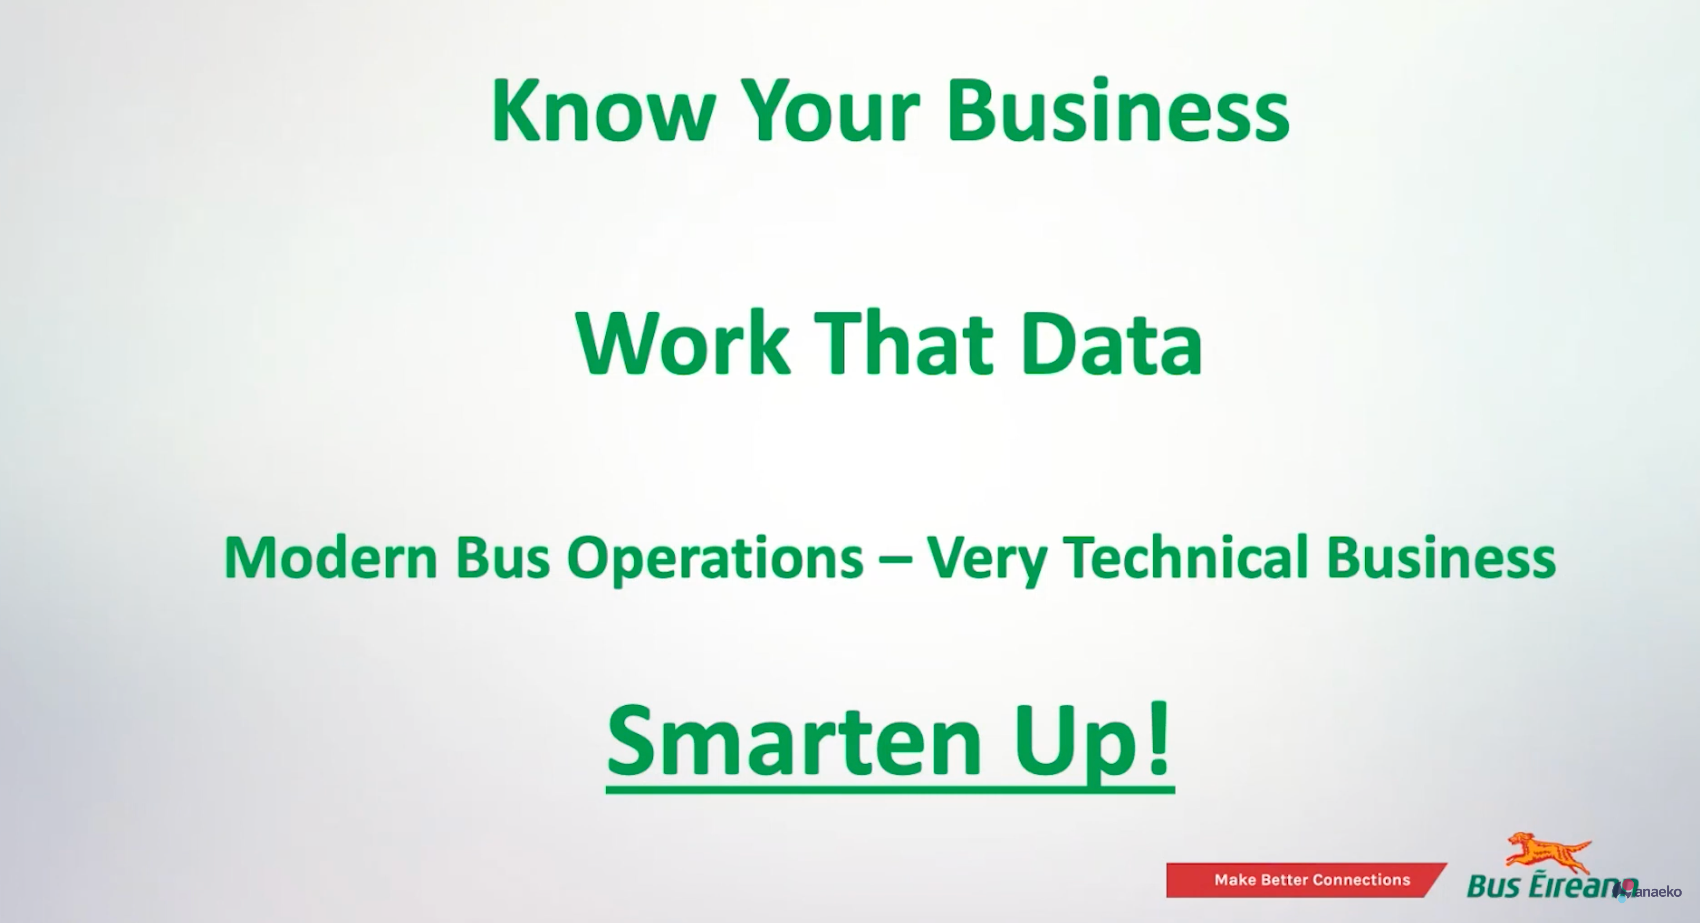 bus-eireann-know-your-data-transport-sustainability